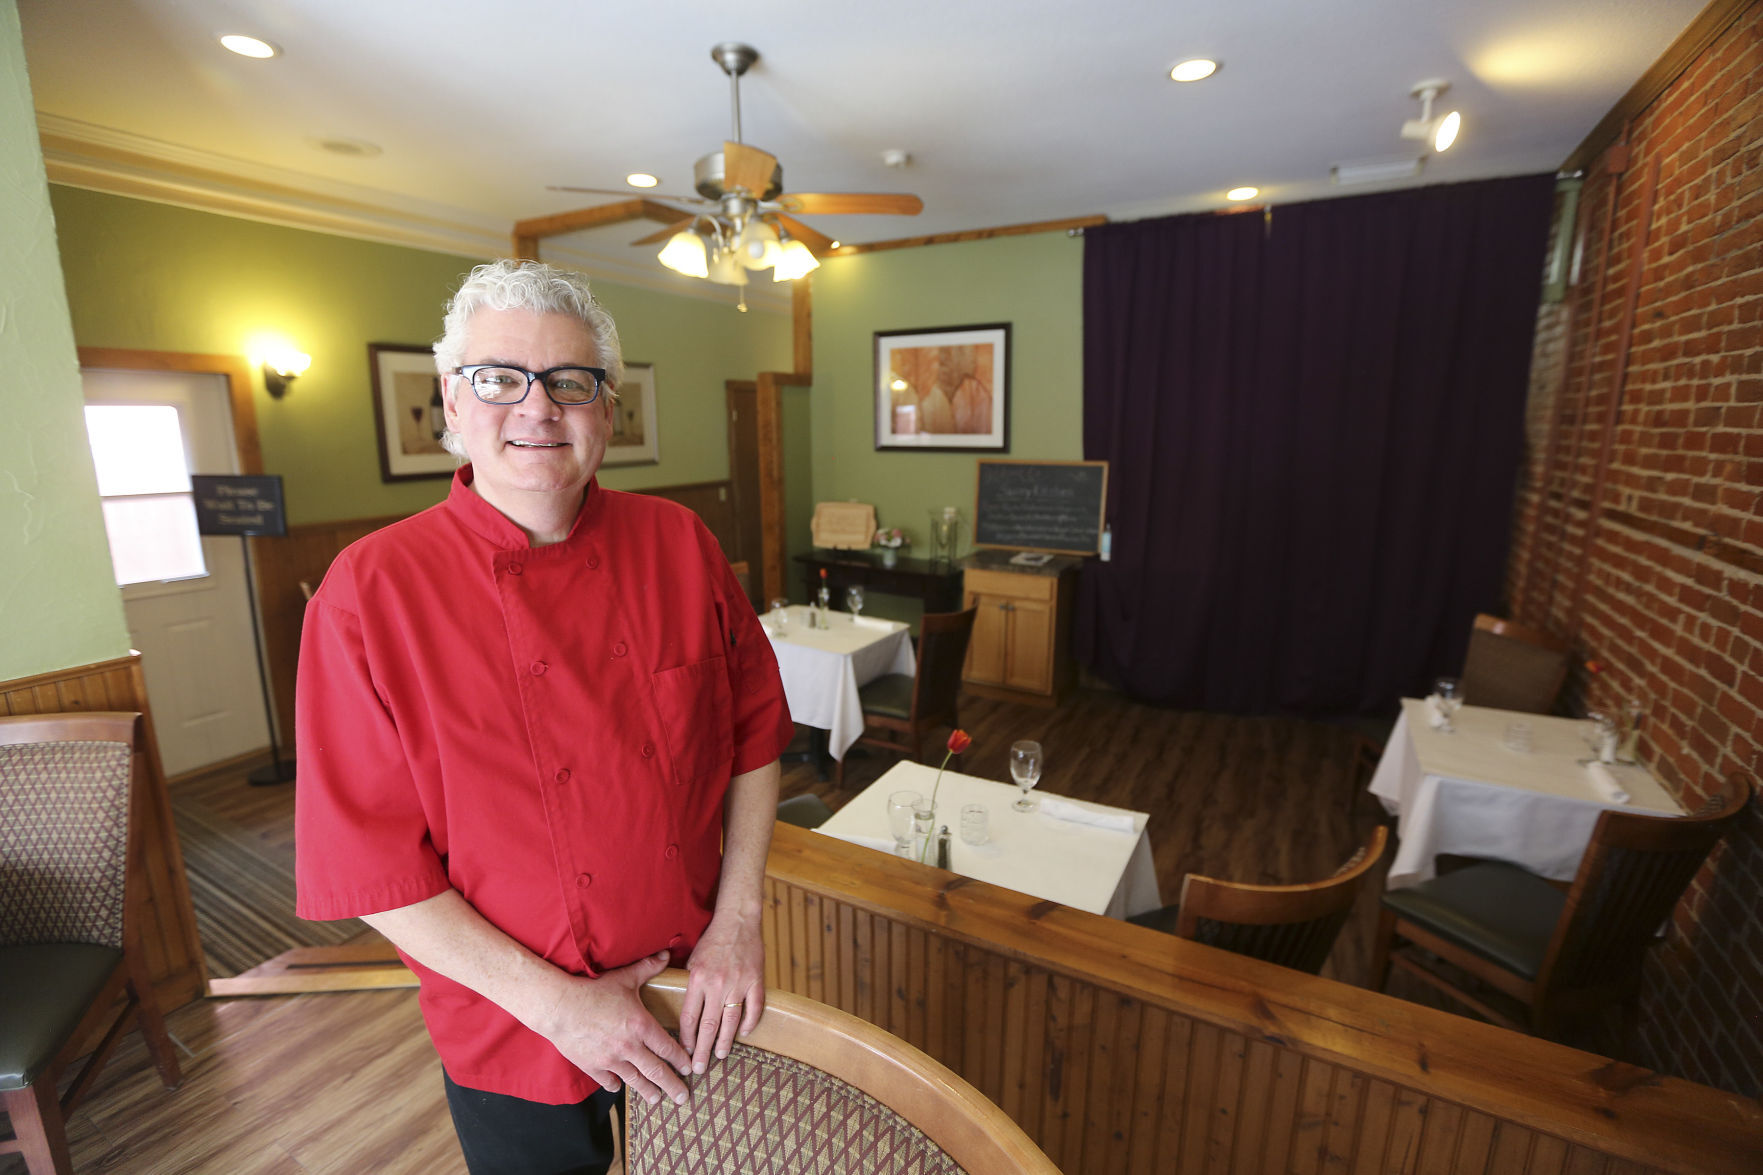 James Ungs opened his restaurant Savory Kitchen in February at 309 N. Main St. in Galena, Ill.    PHOTO CREDIT: Dave Kettering